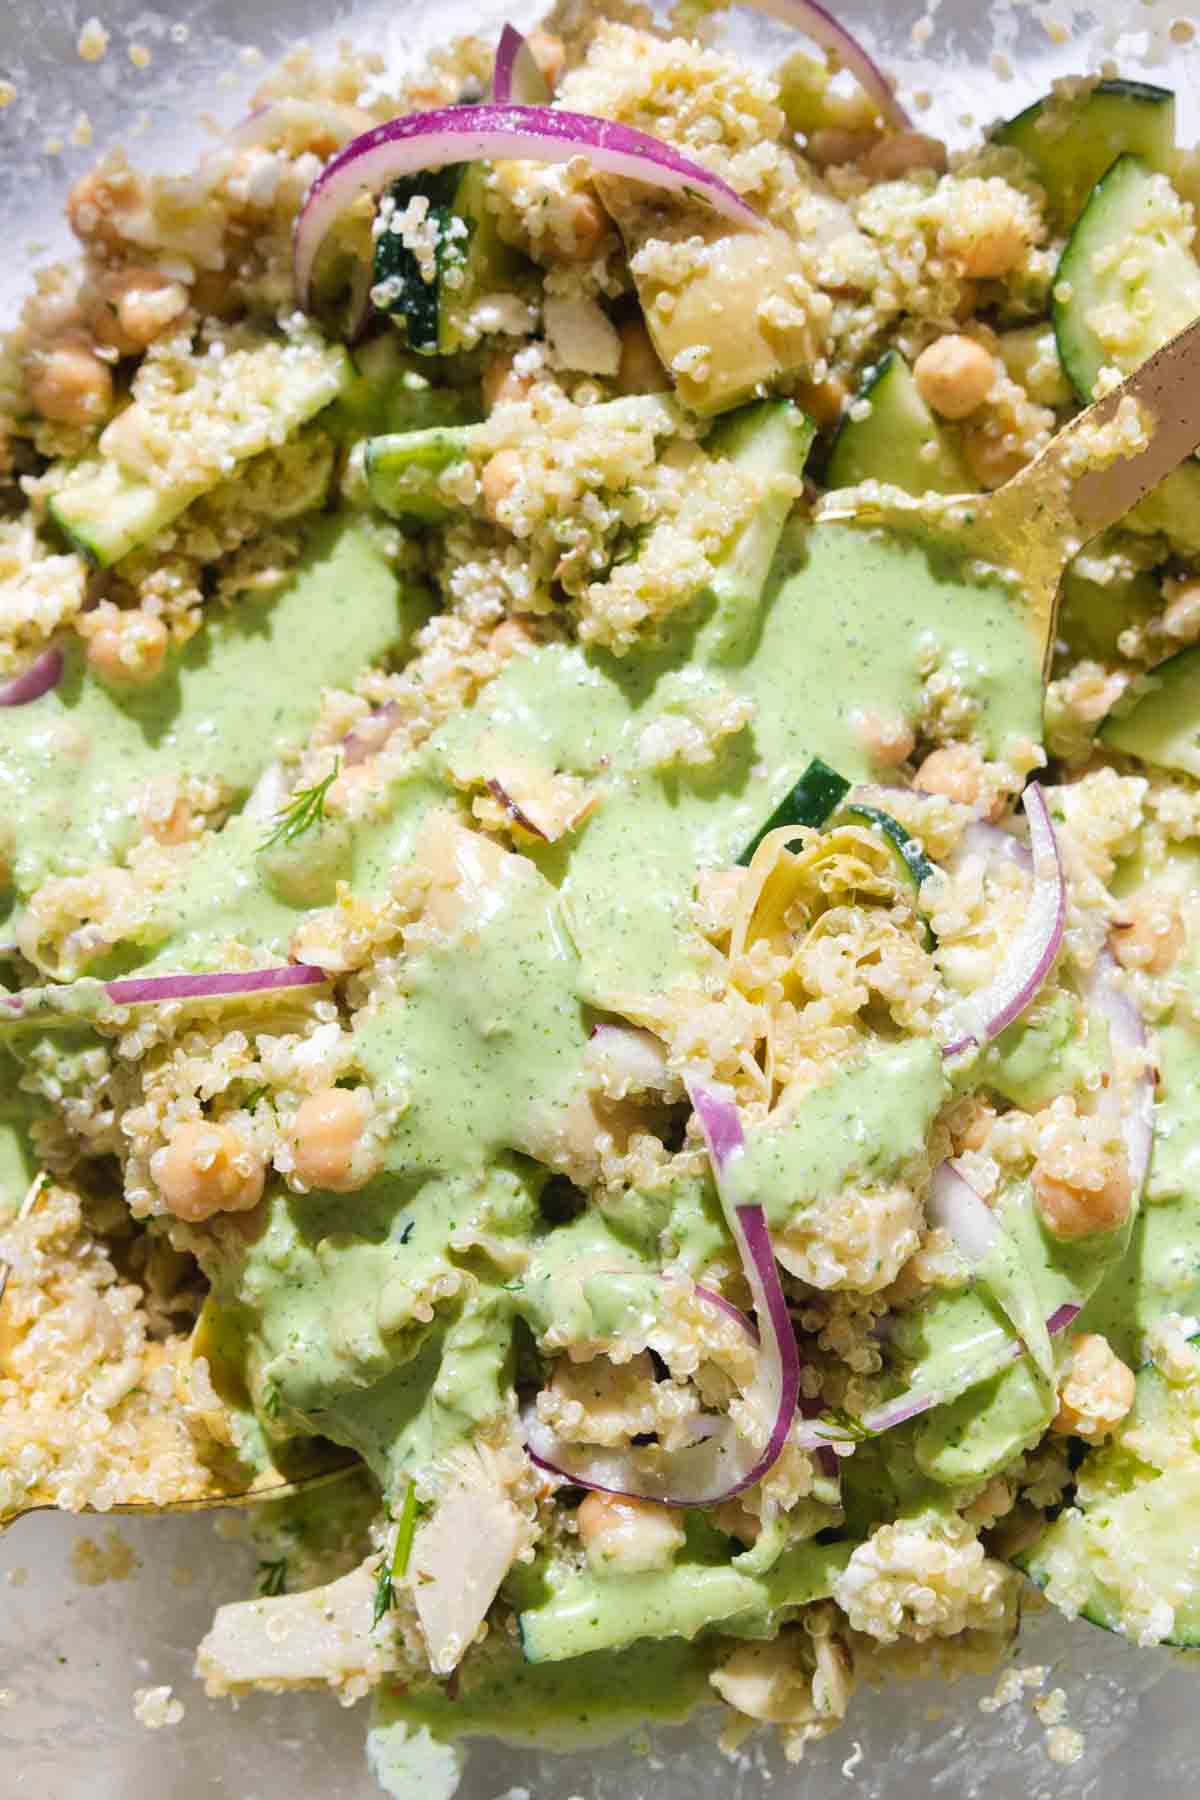 Close up of green salad dressing drizzle on the quinoa salad.